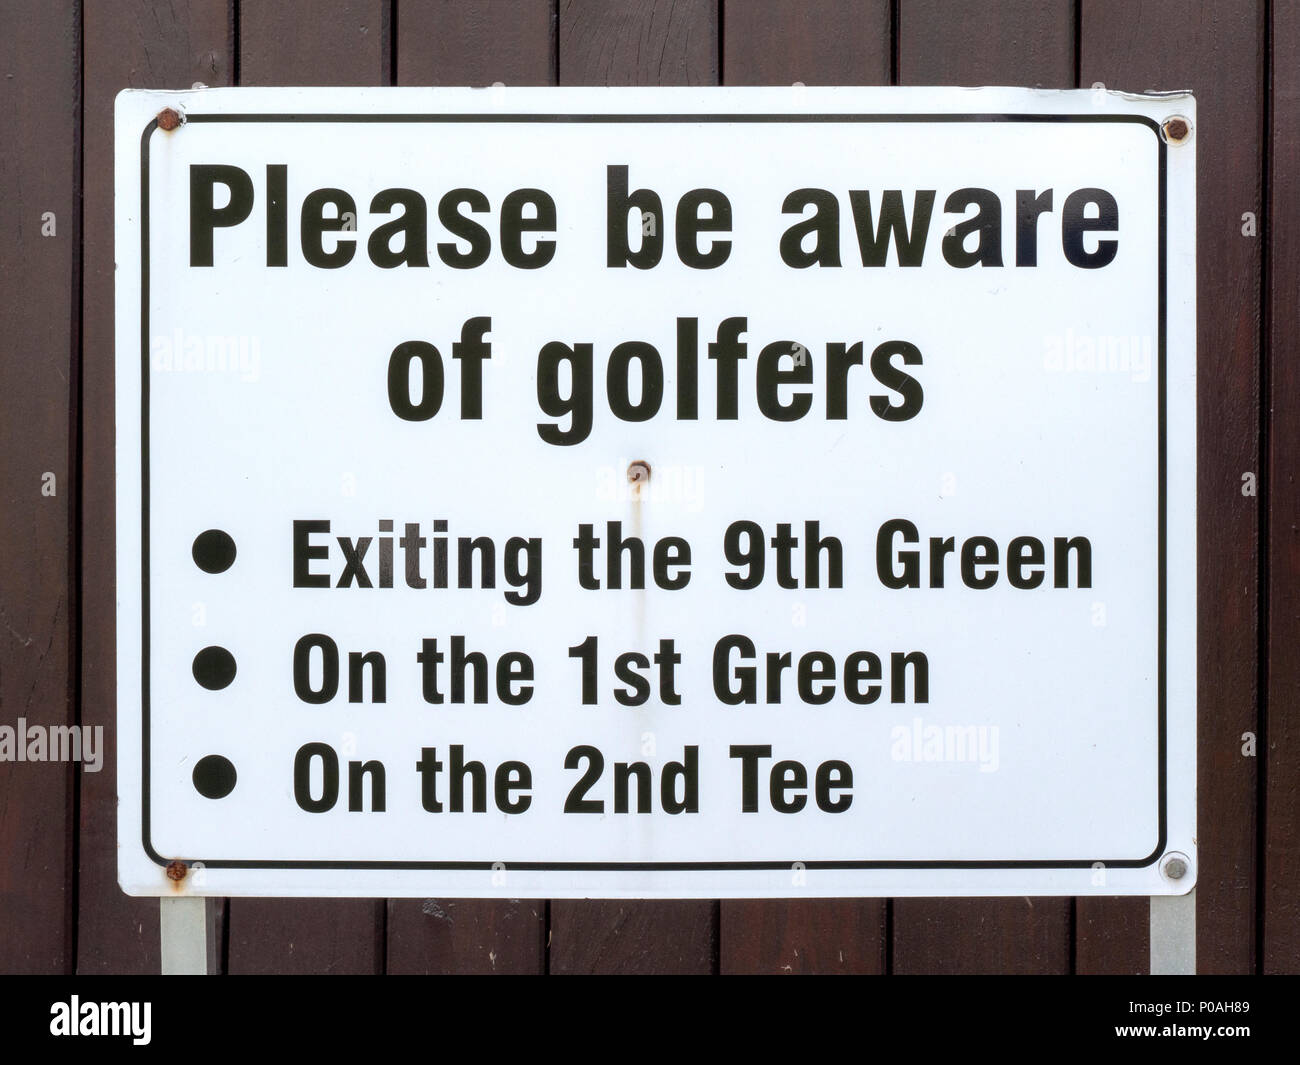 Please Be Aware of Golfers sign at The Old Golf Course in Musselburgh, East Lothian, Scotland, one of the oldest golf courses in the world. Stock Photo